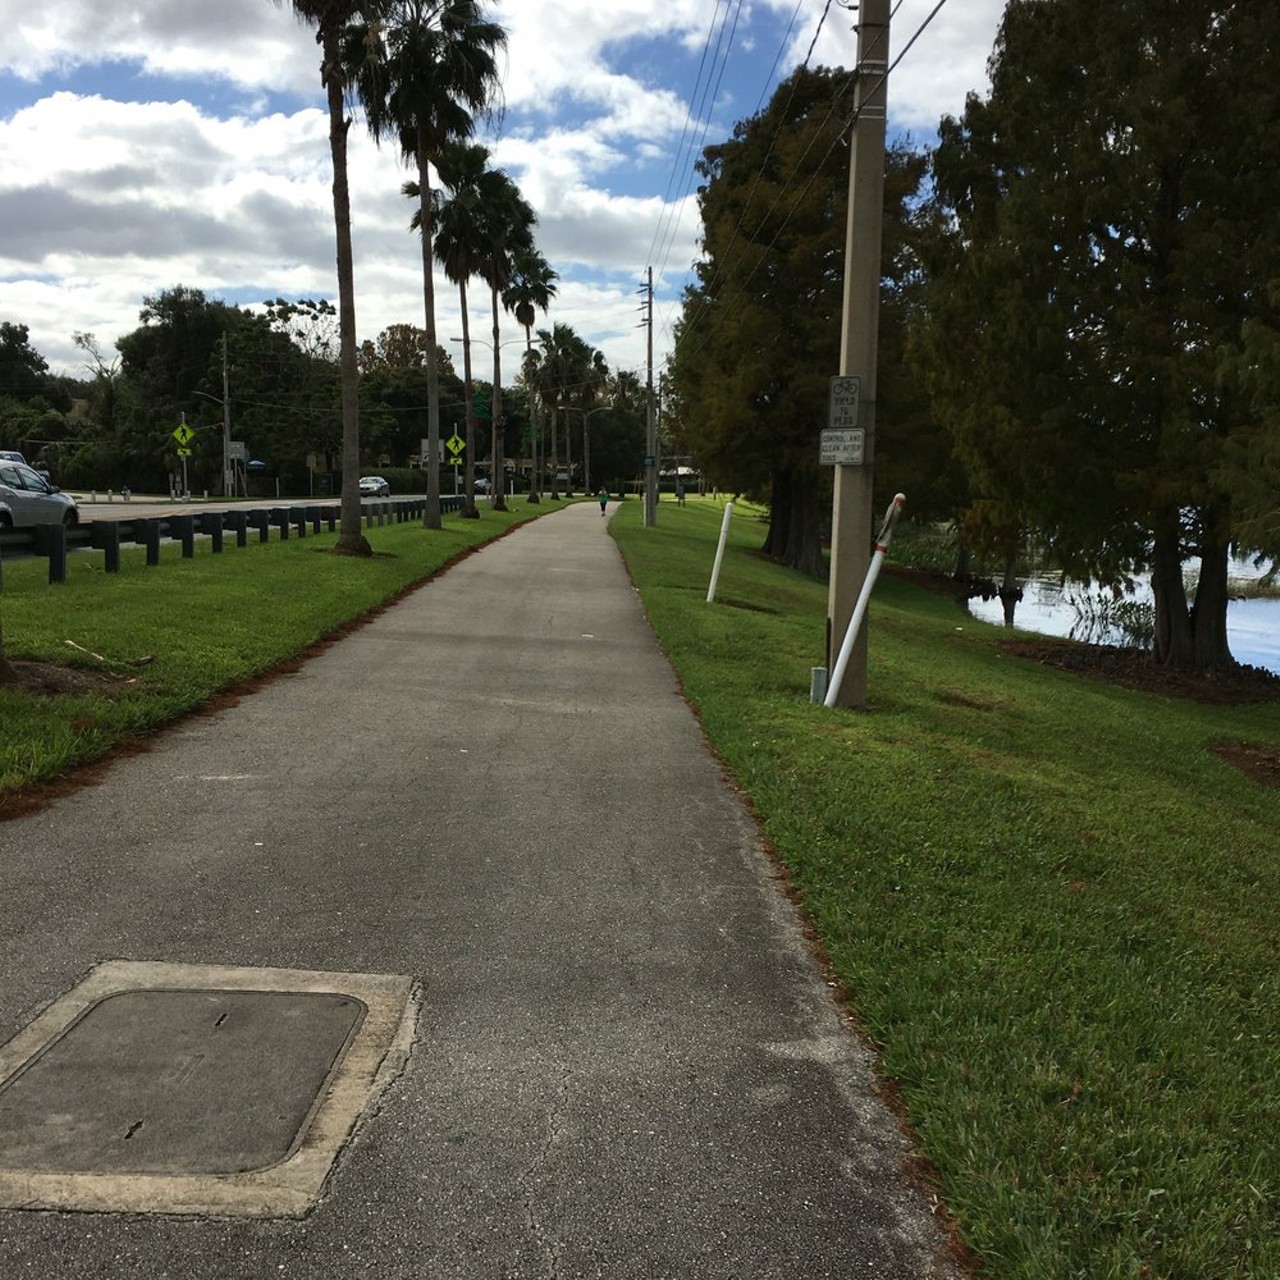 Lake Underhill Path
The Lake Underhill bike path stretches for 2.5 miles and links through four parks: Lake Underhill Park, Orlando Festival Park, Col, Joe Kittinger Park and Park of the Americas. Health buffs also have the option of using the fitness stations scattered throughout the path.
Photo via Tracy E / Yelp